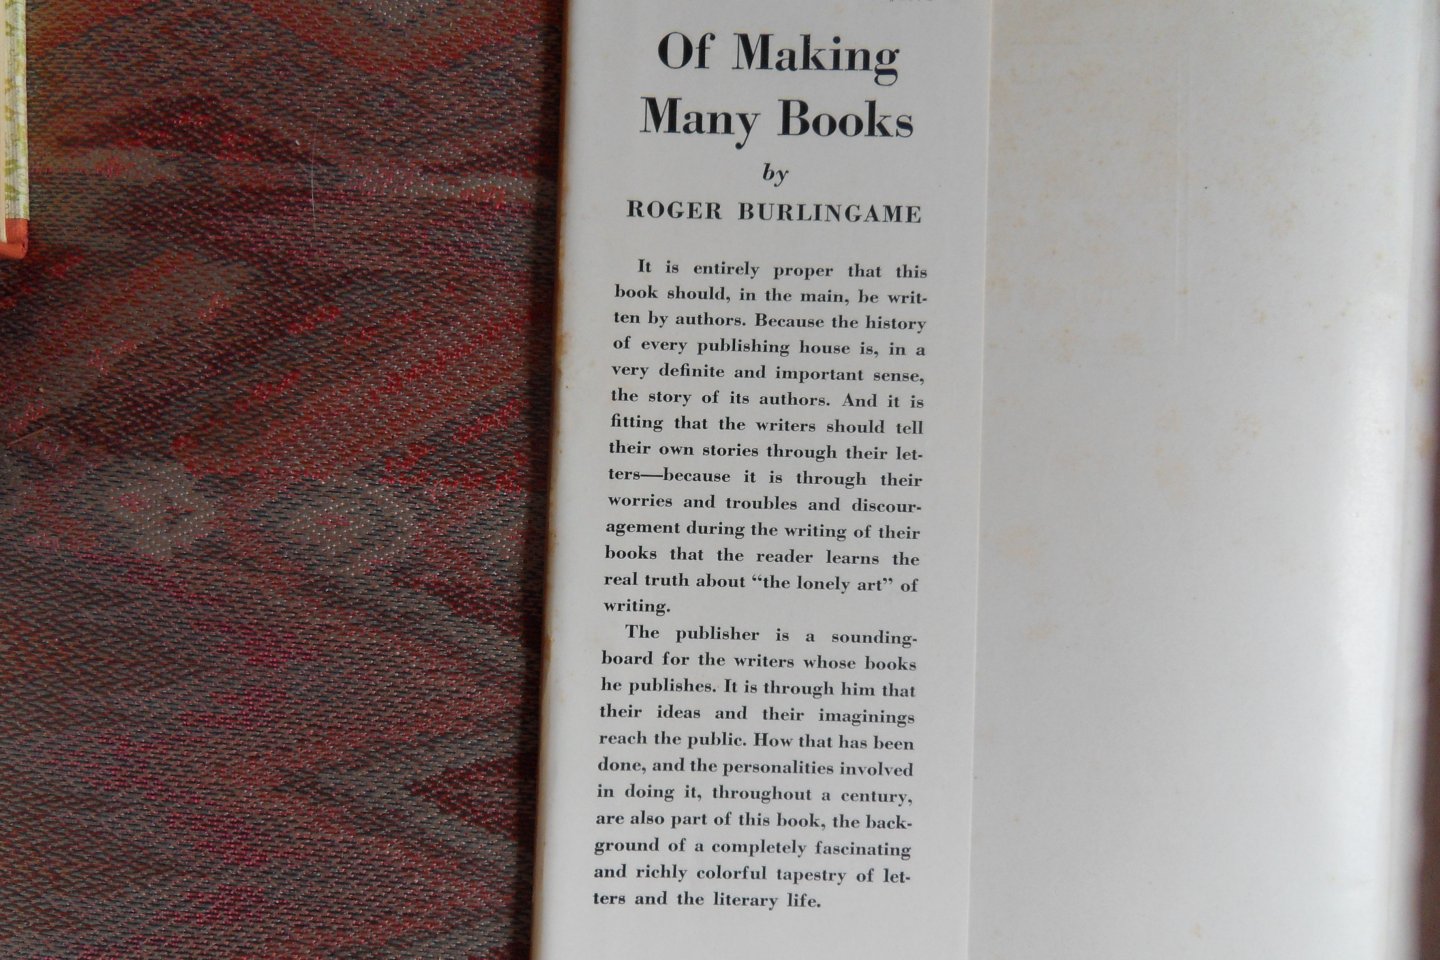 Burlingame, Roger. - Of Making Many Books. - A Hundred Years of Reading, Writing and Publishing.